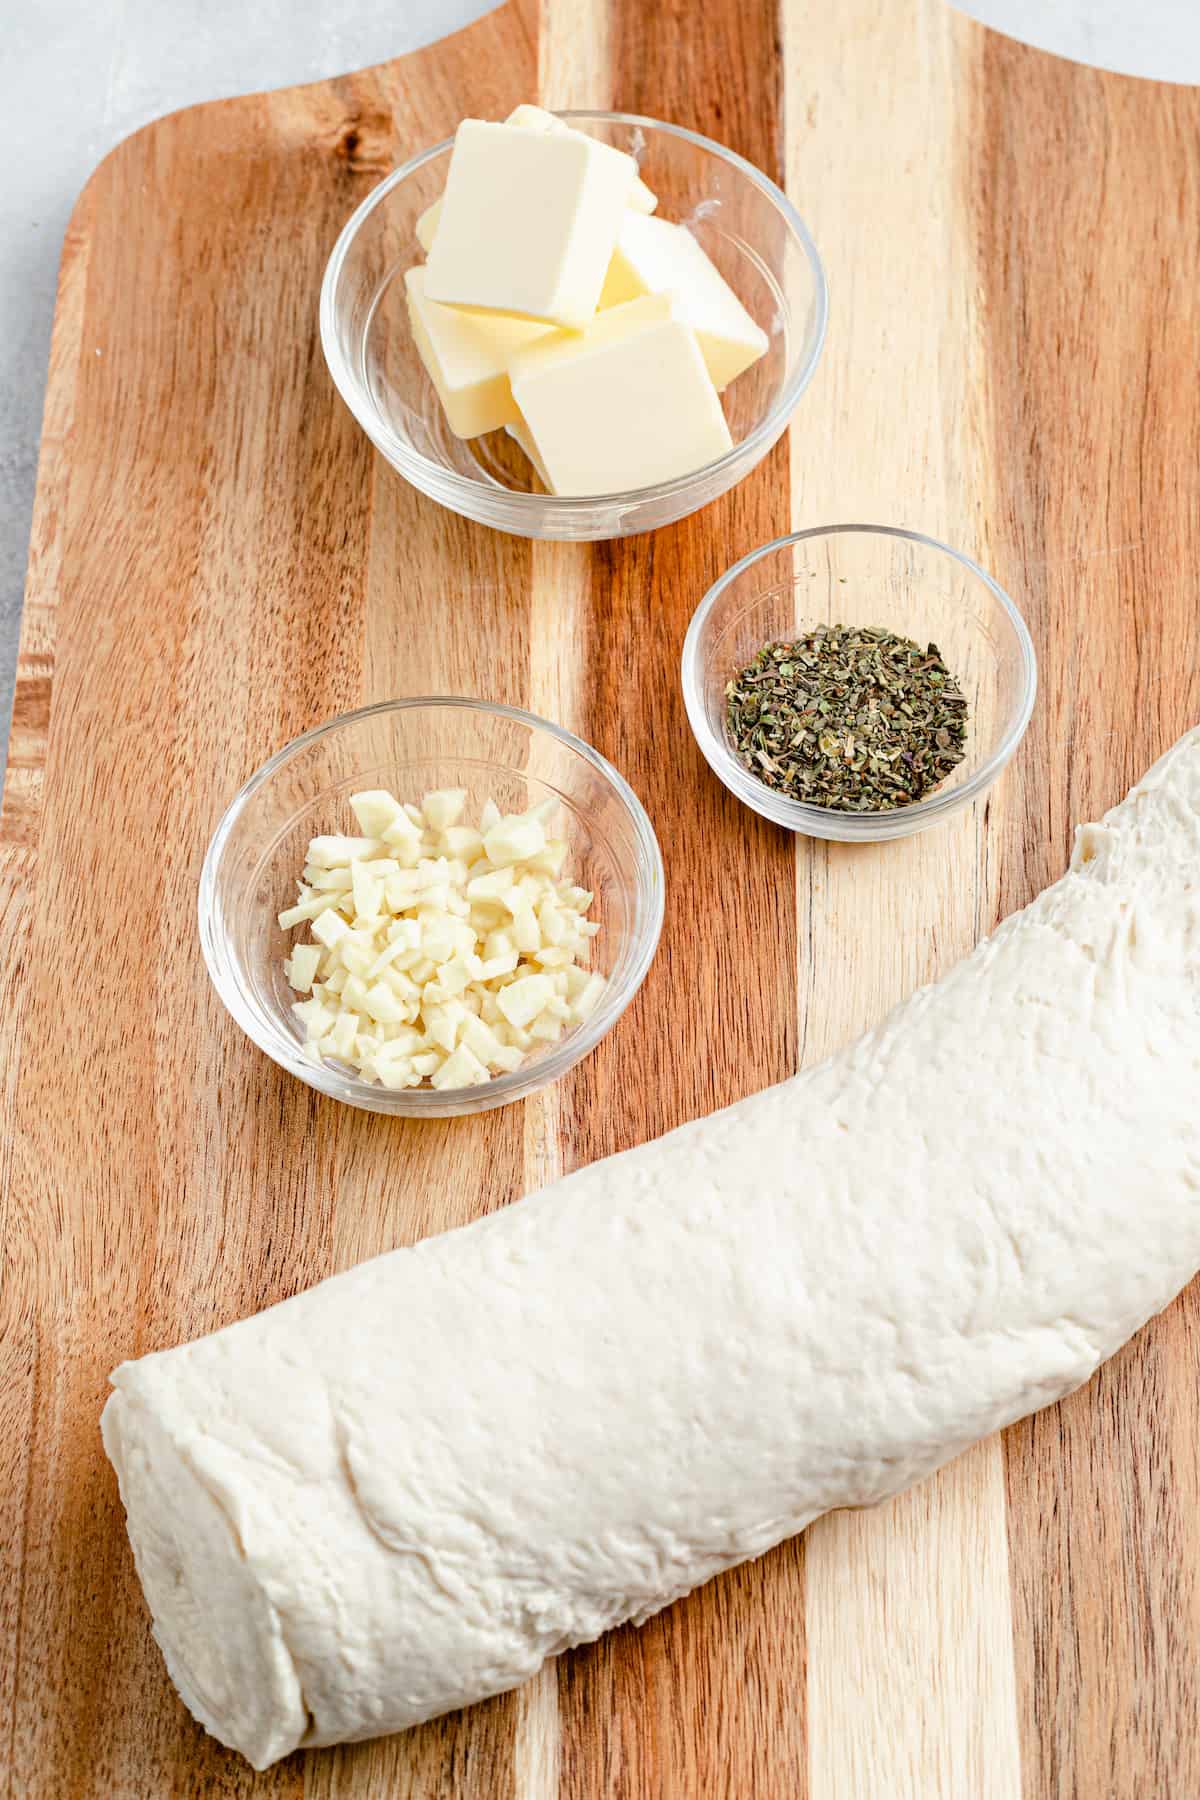 Clockwise from top: butter, Italian seasoning, a roll of pizza dough, a dish of minced garlic.